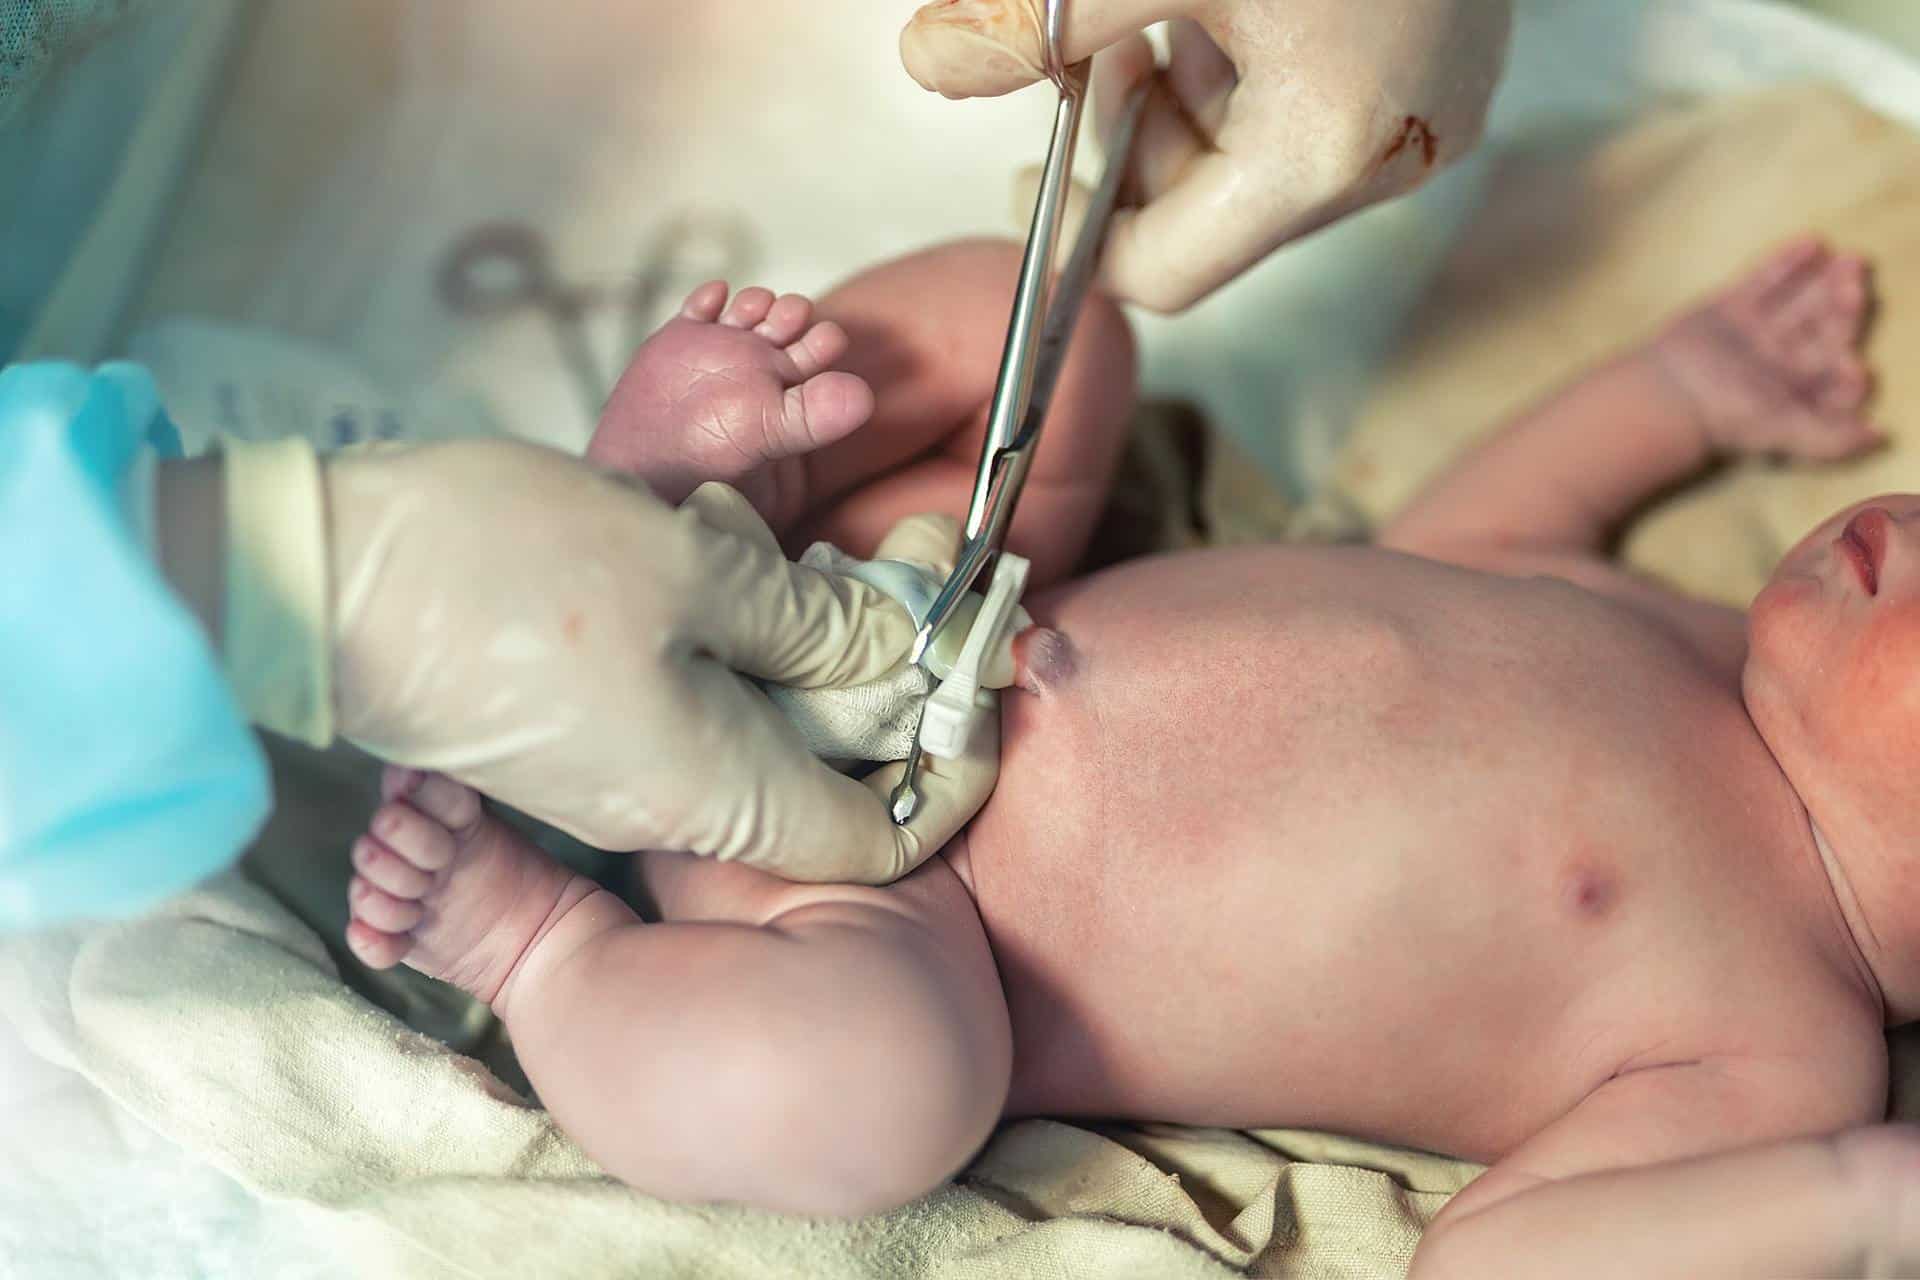 Close-up doctor obstetrician nurse cutting umbilical cord with medical scissors to newborn baby